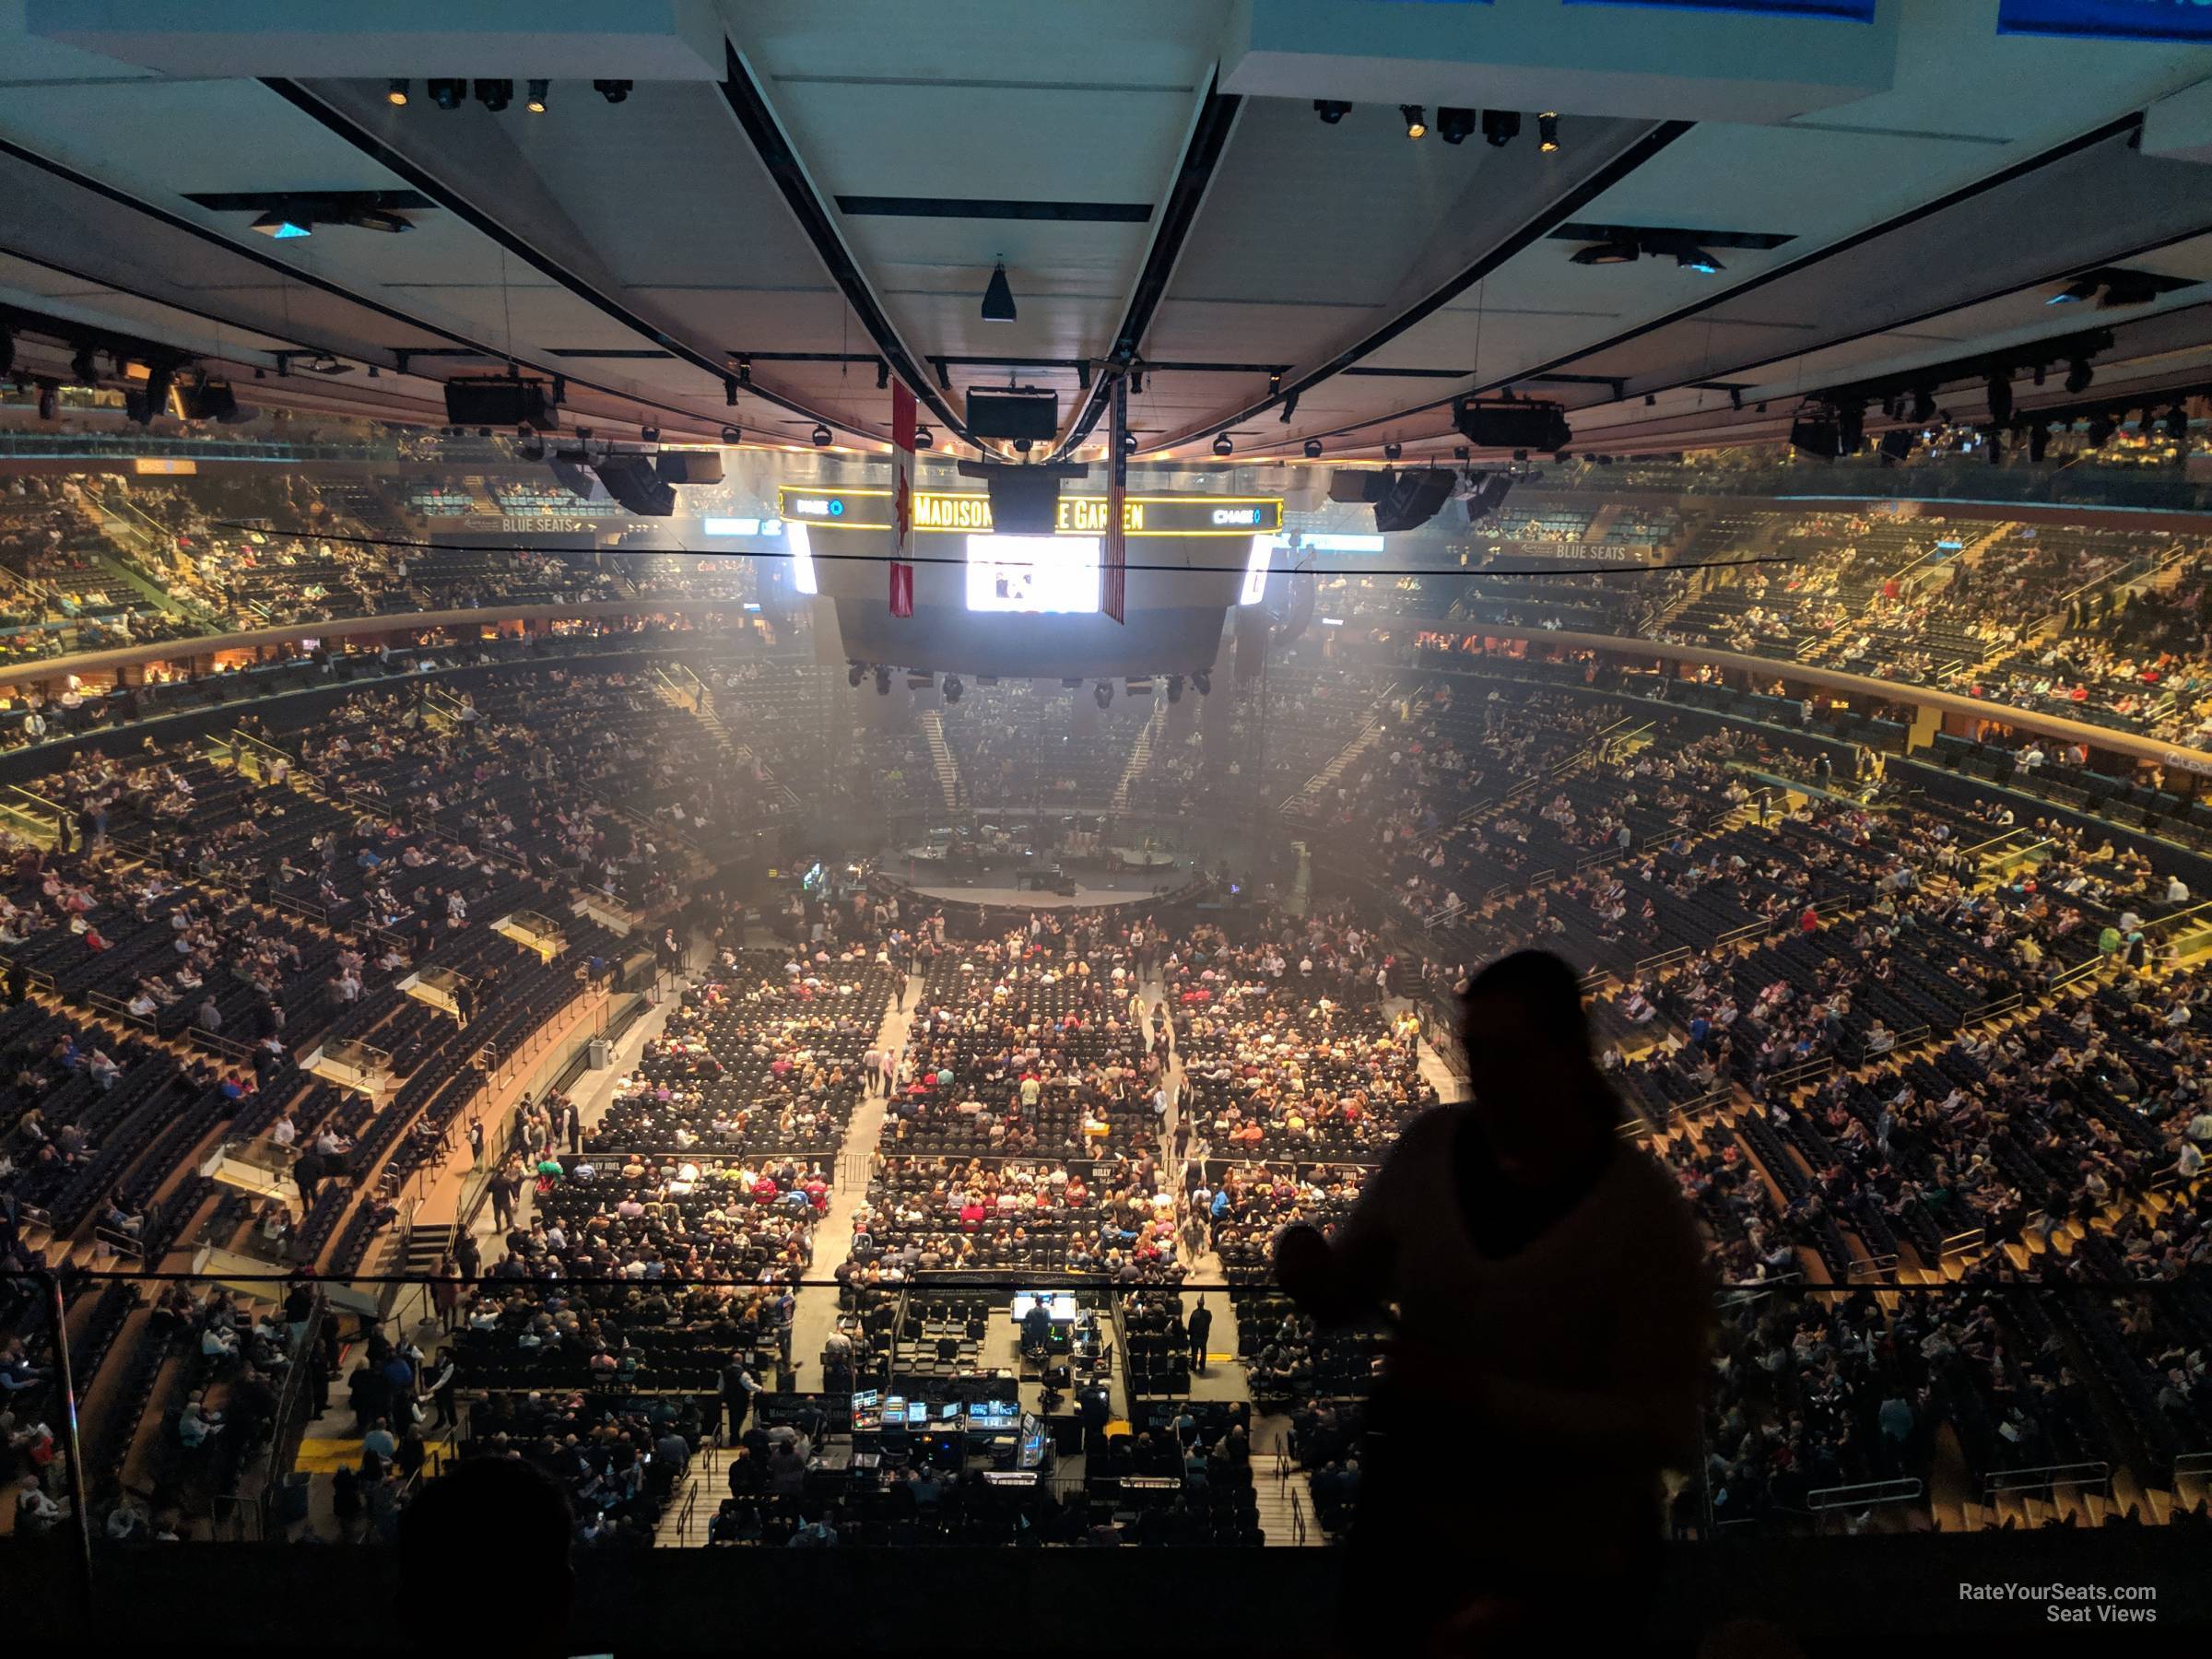 Madison Square Garden Concert Section 305 Row 2 On 5 9 2019 FL 